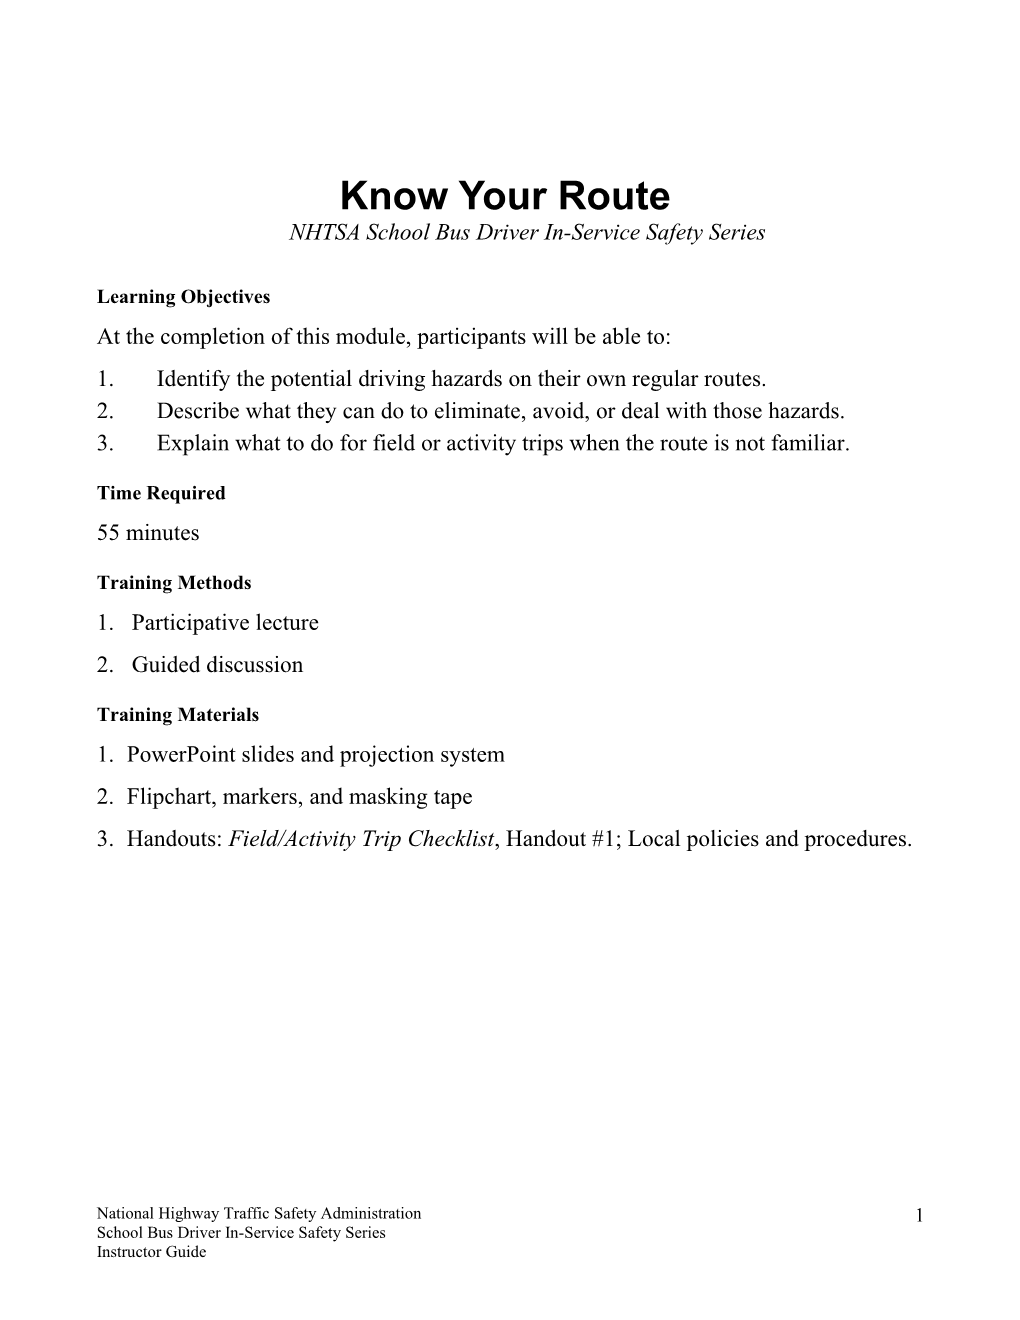 Know Your Routenhtsaschool Bus Driver In-Service Safety Series